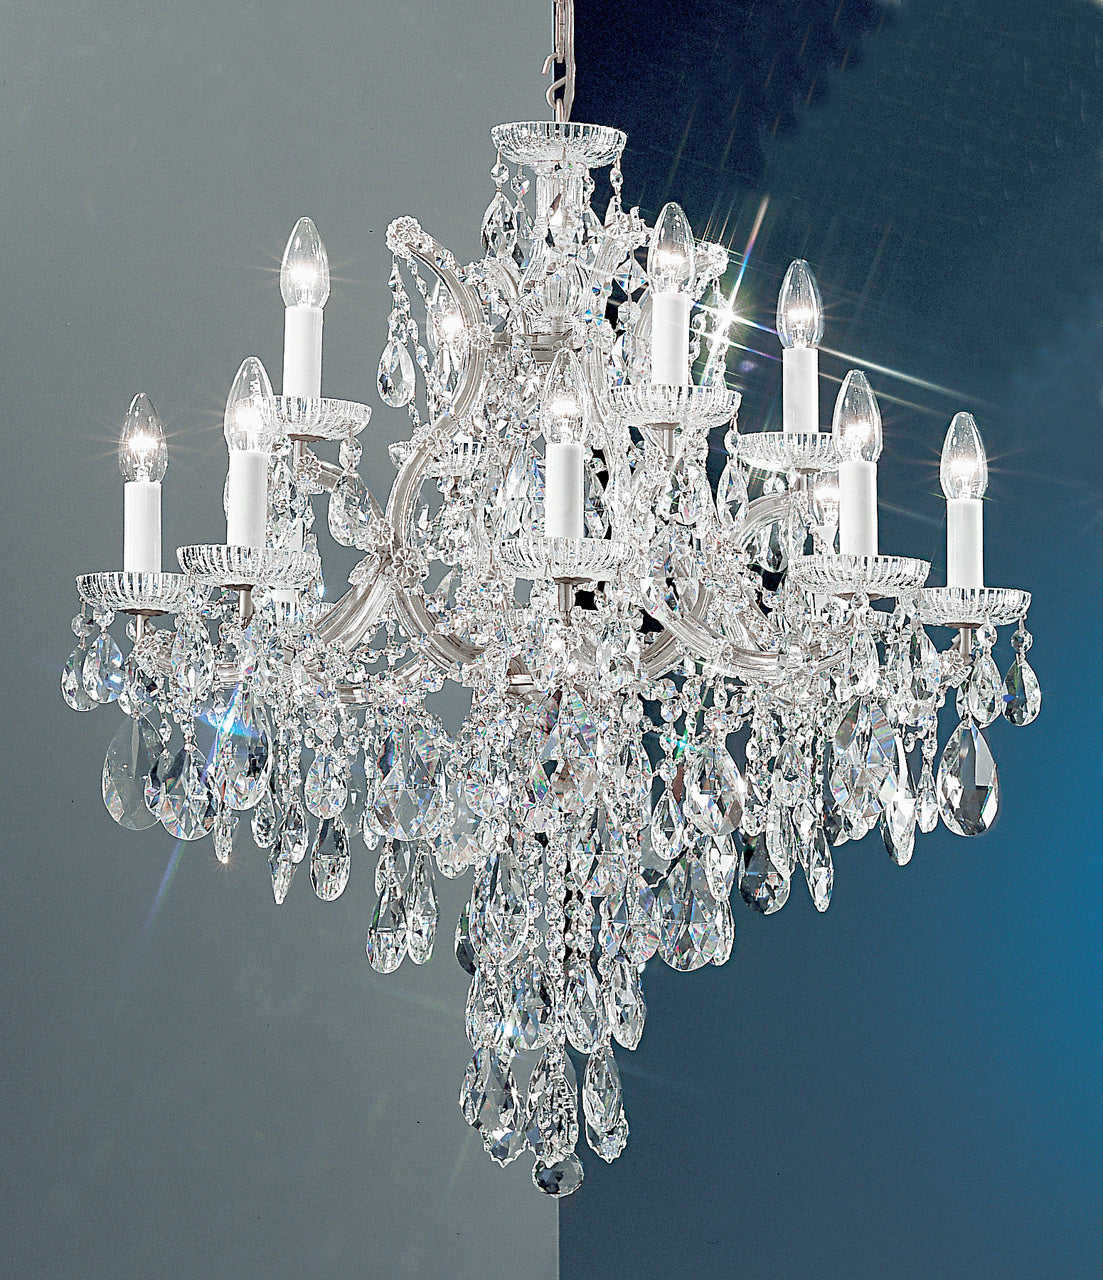 Classic Lighting 8123 CH SC Maria Theresa Traditional Crystal Chandelier in Chrome (Imported from Italy)